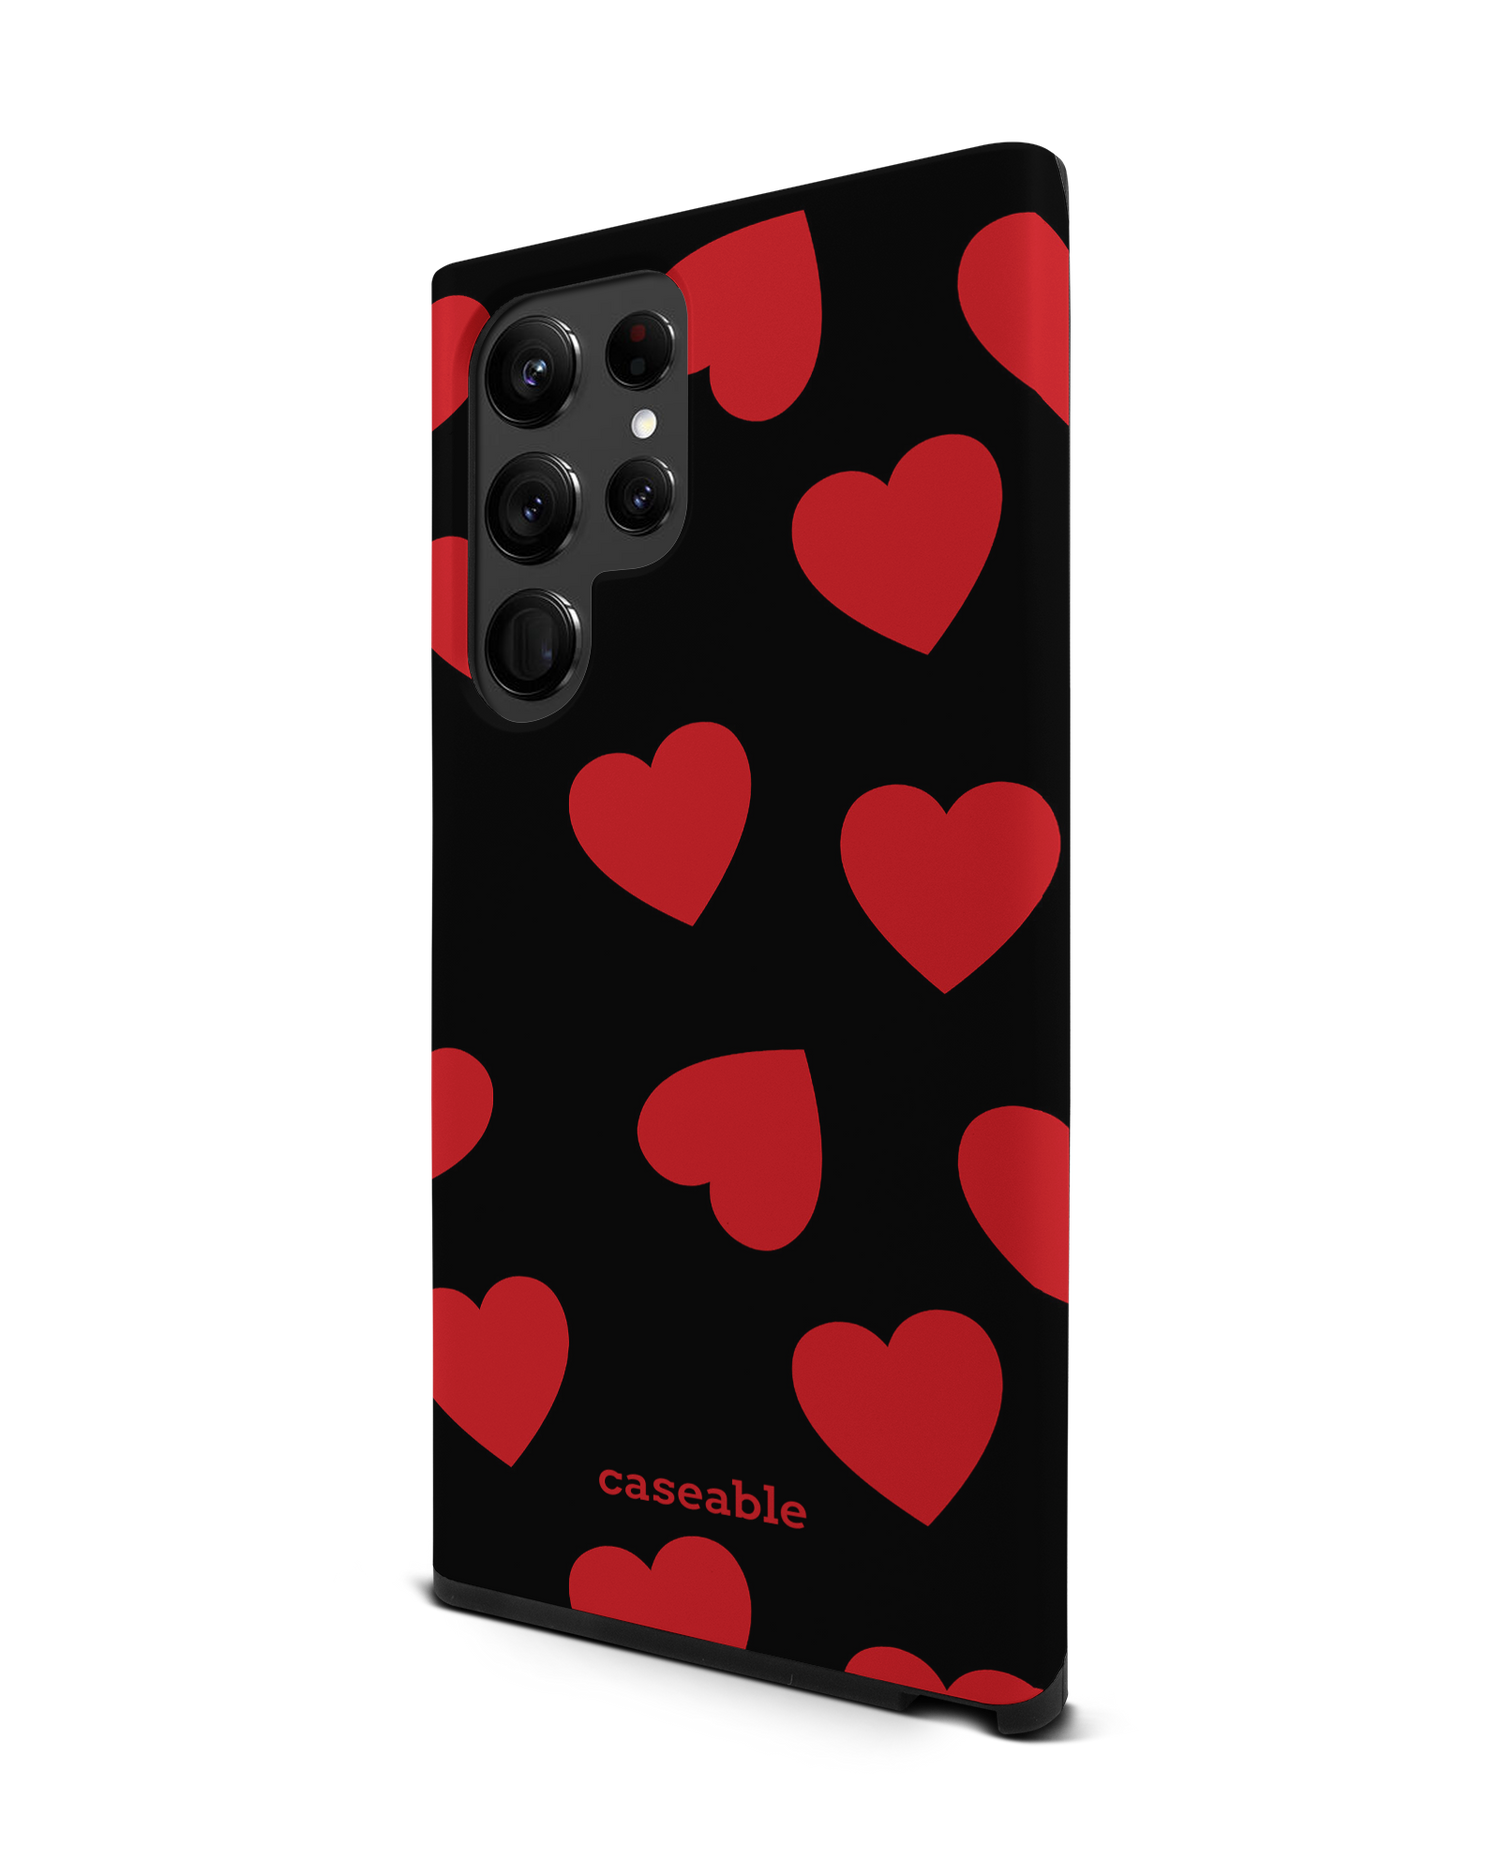 Repeating Hearts Premium Phone Case Samsung Galaxy S22 Ultra 5G: View from the right side